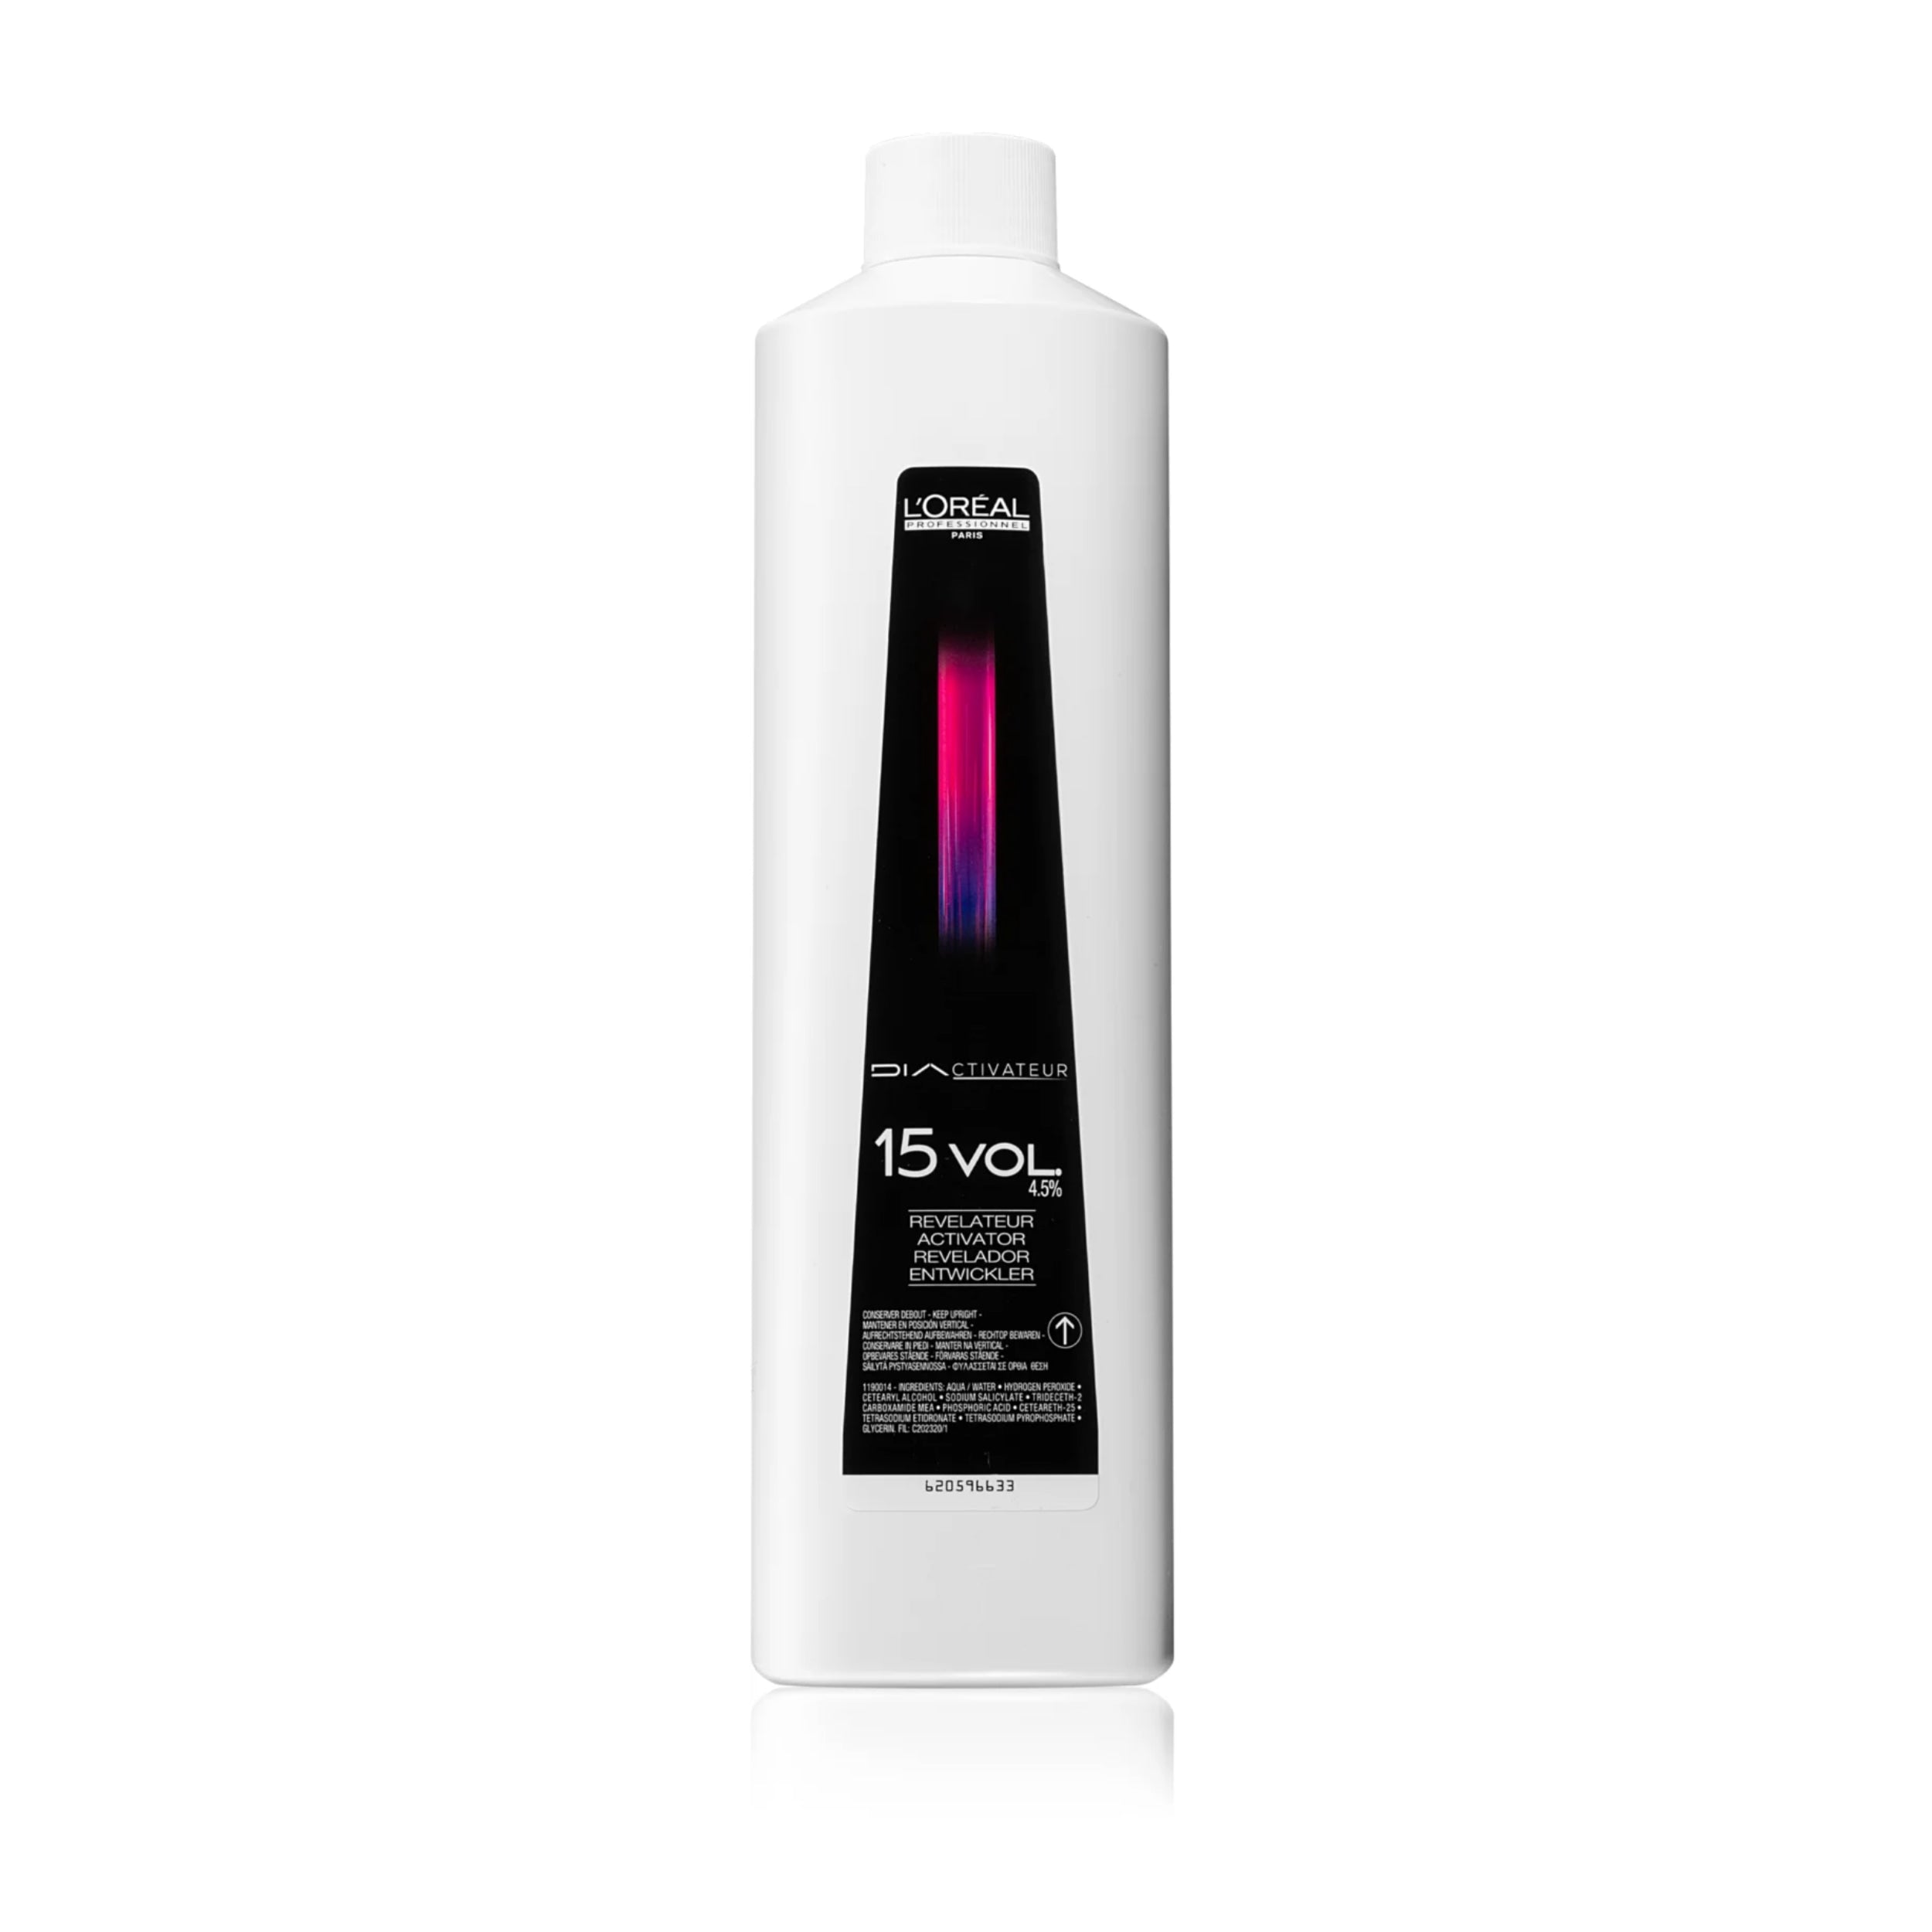 a bottle of Dia Actinatuer hair product on a white background